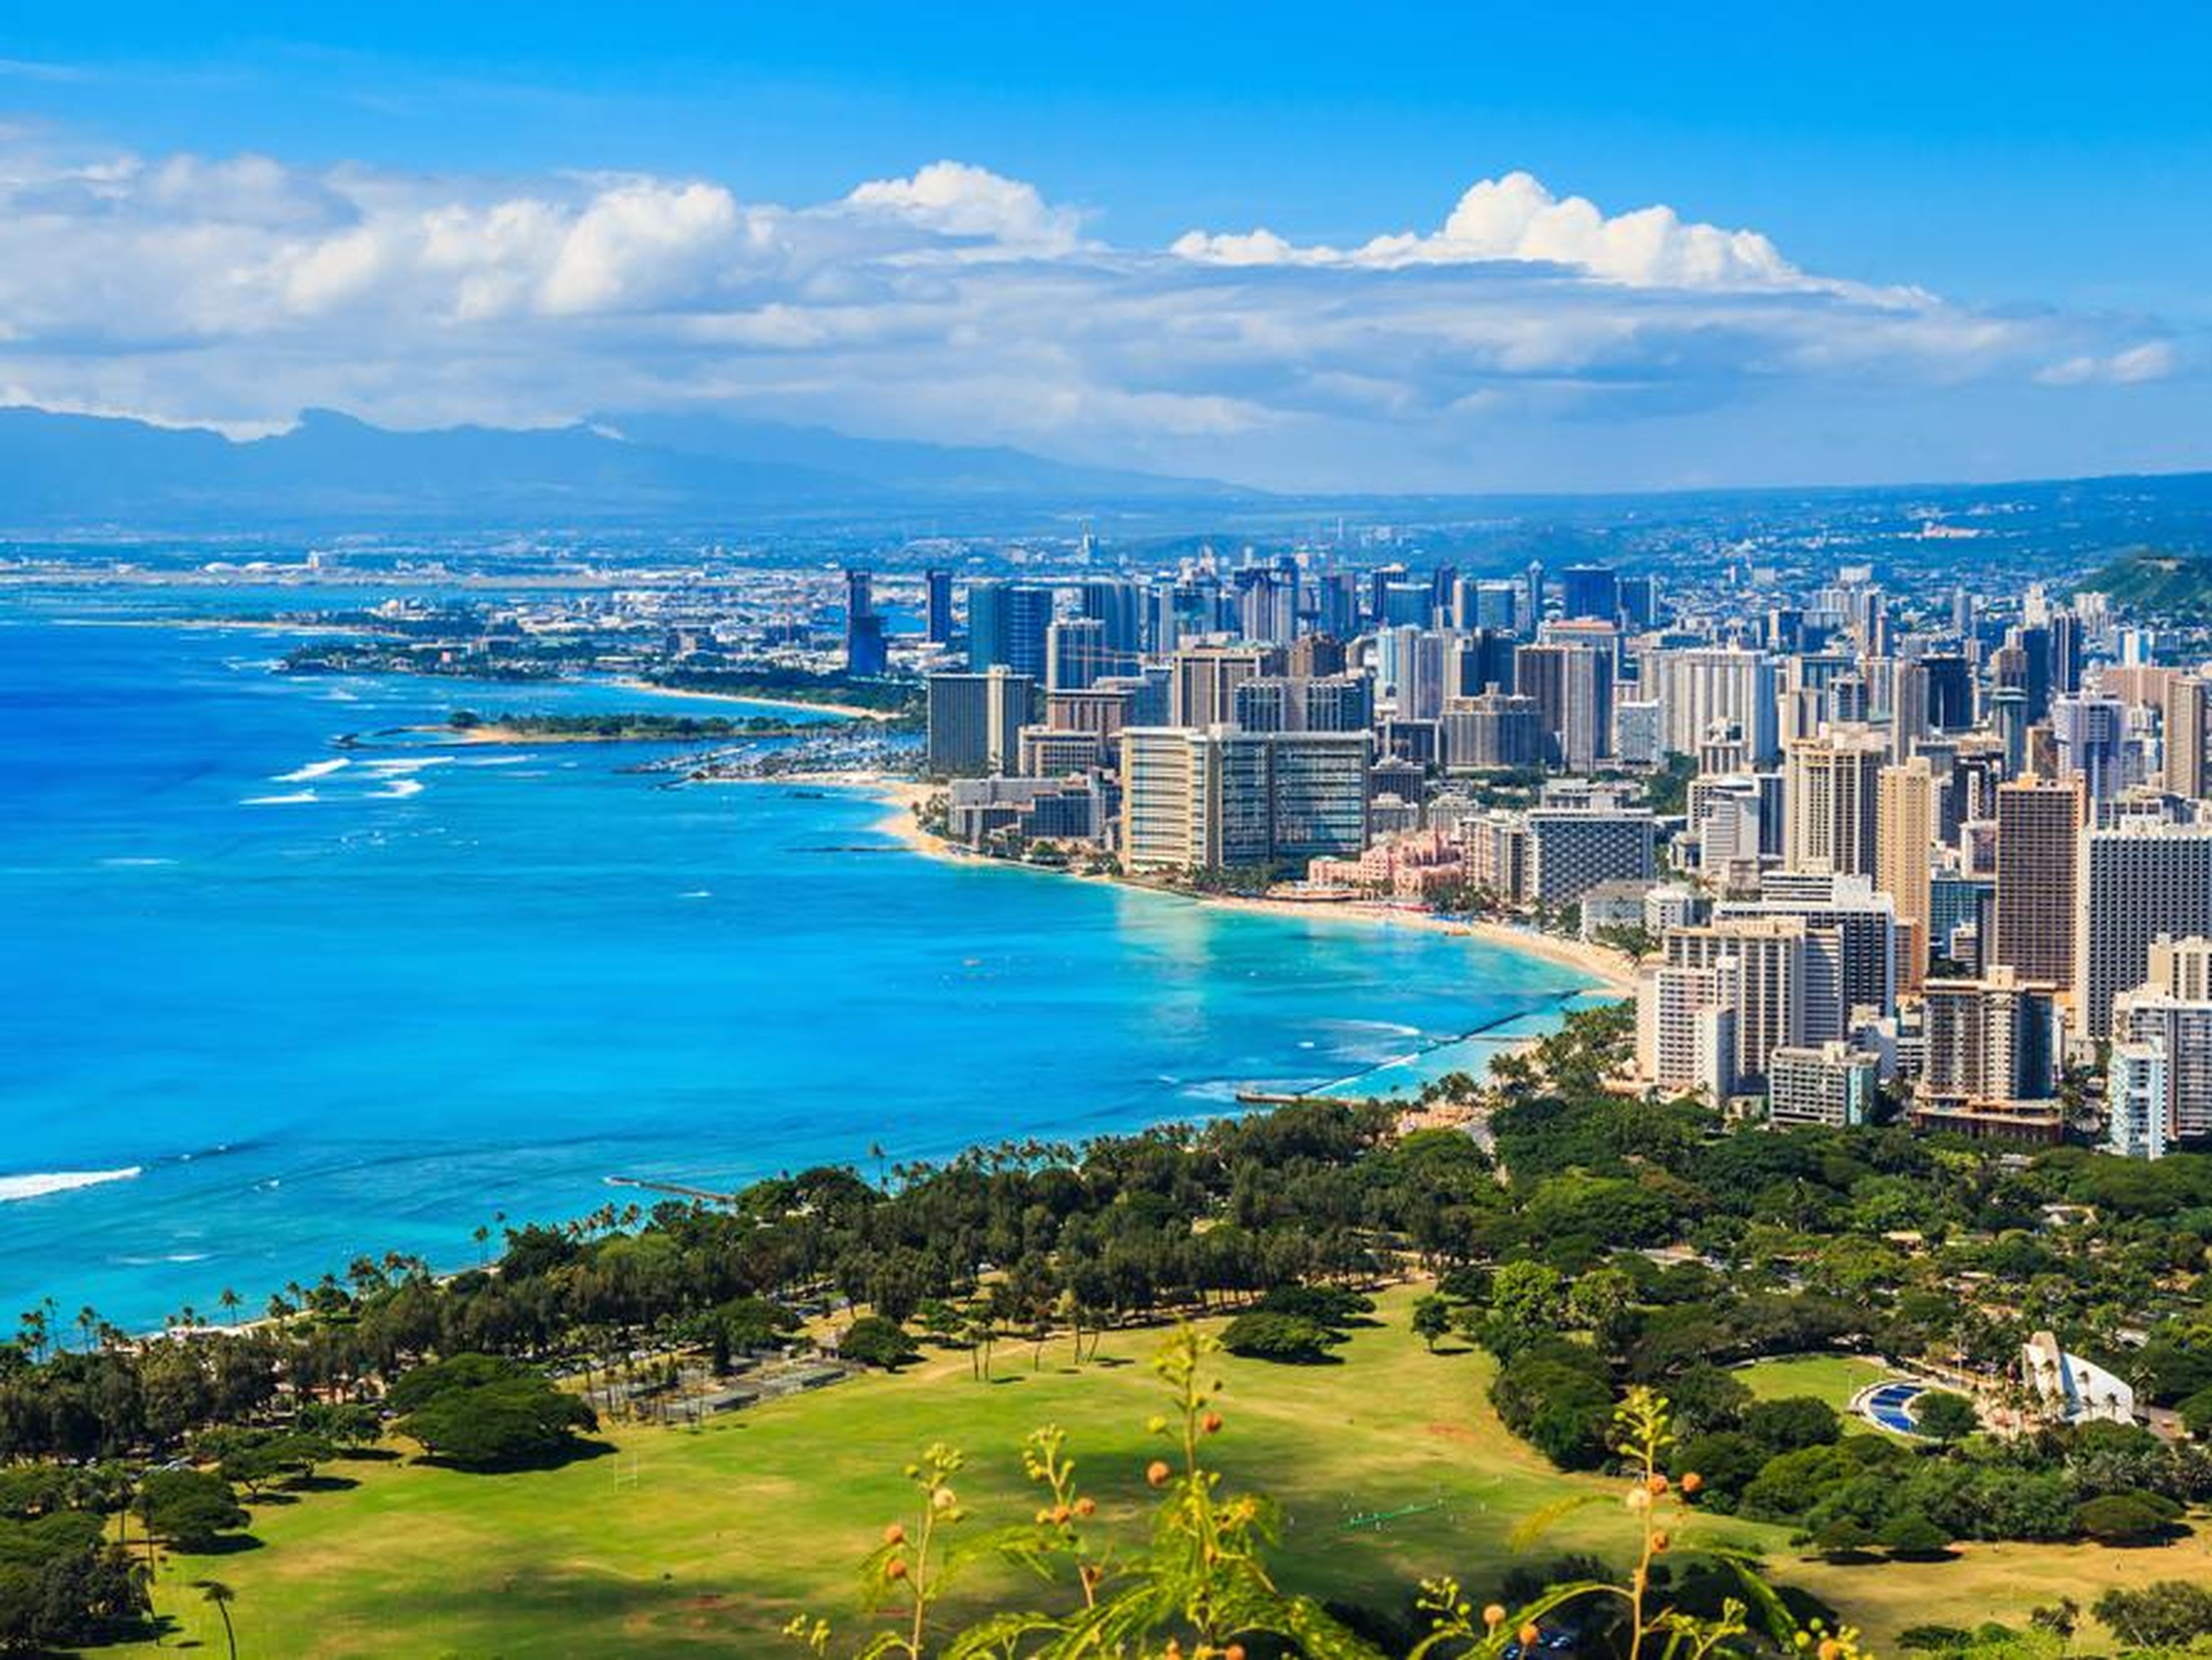 Honolulu was deemed the most livable city in America, and 23rd in the world, in the Economist Intelligence Unit's annual ranking in 2018.